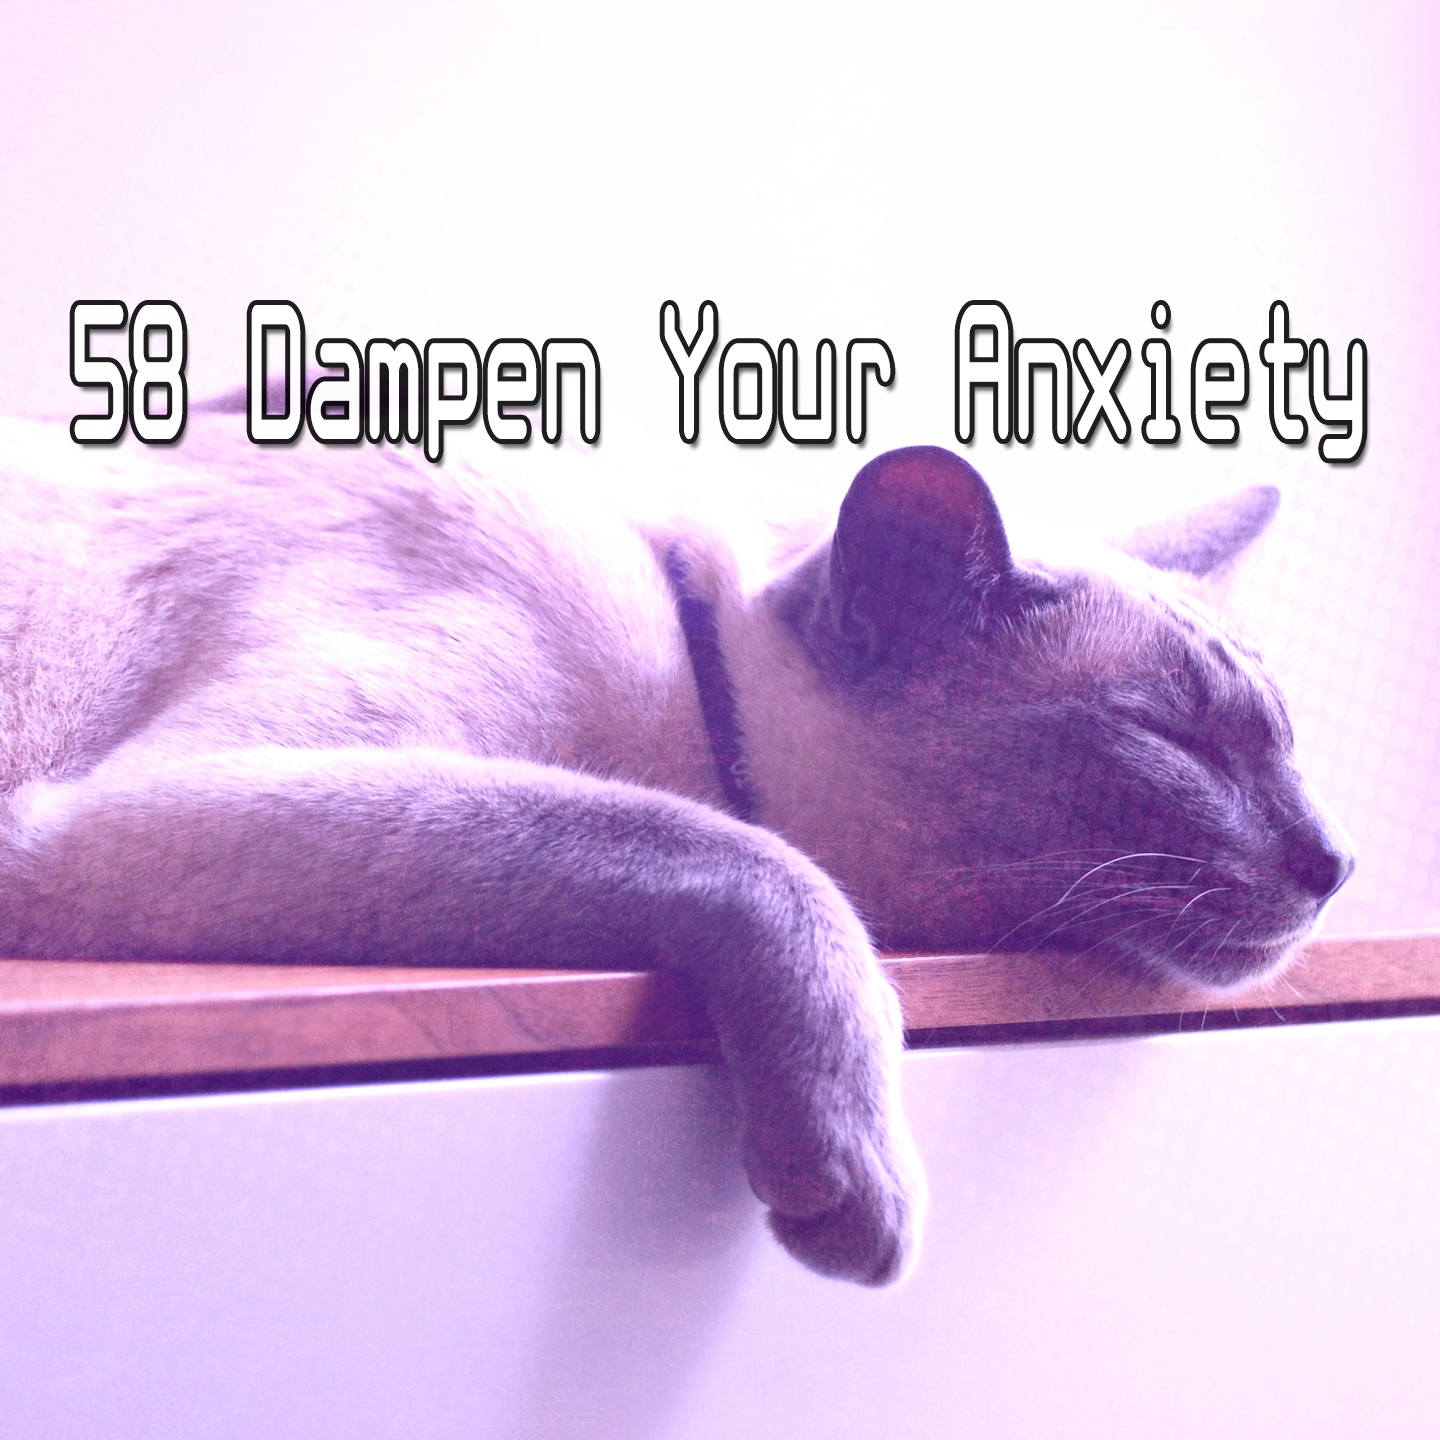 58 Dampen Your Anxiety